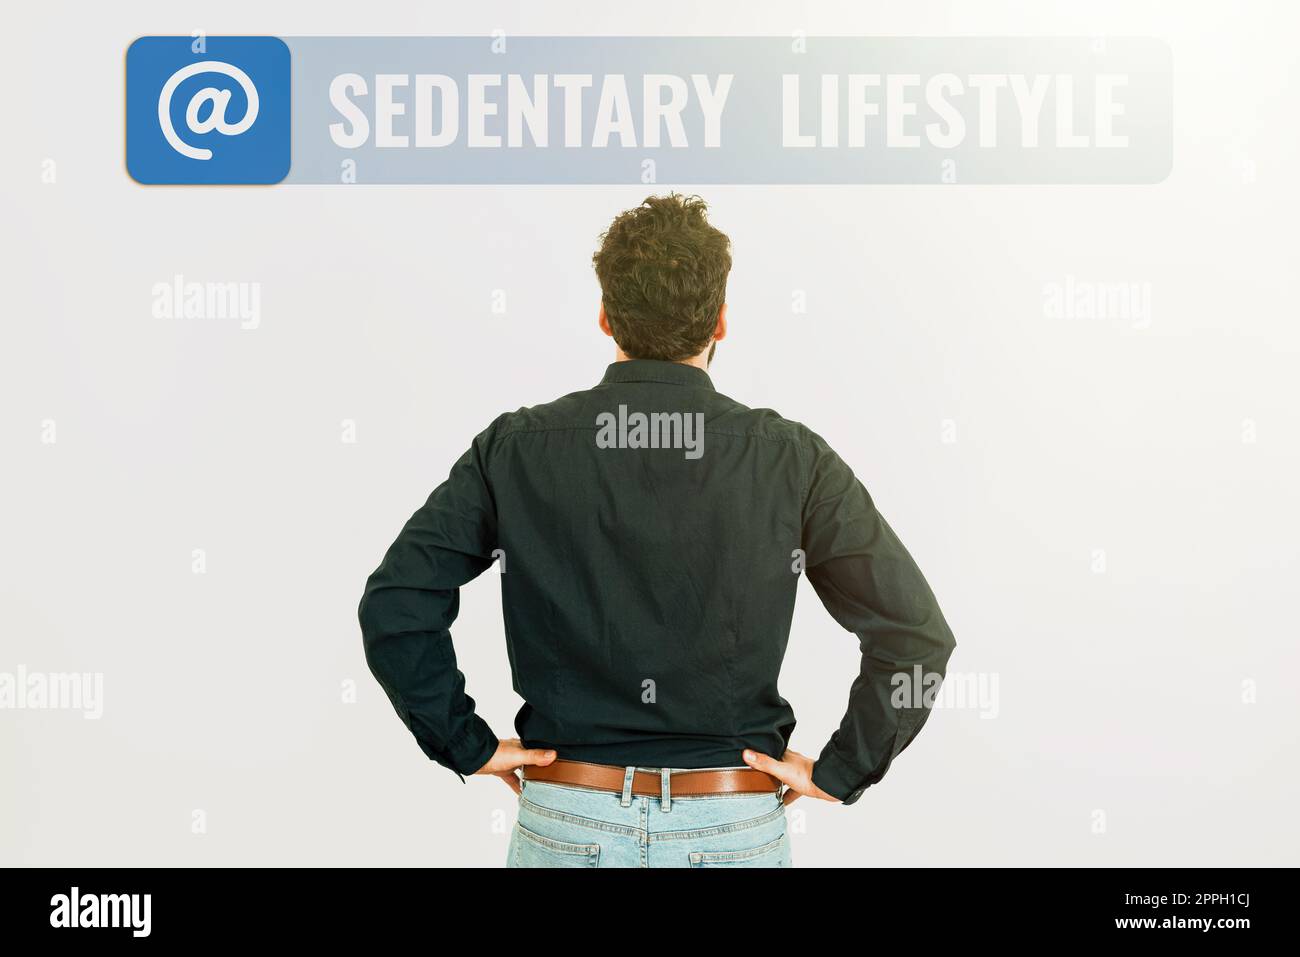 Text caption presenting Sedentary Lifestyle. Internet Concept ways and means of life involved in much sitting and low physical activity Stock Photo